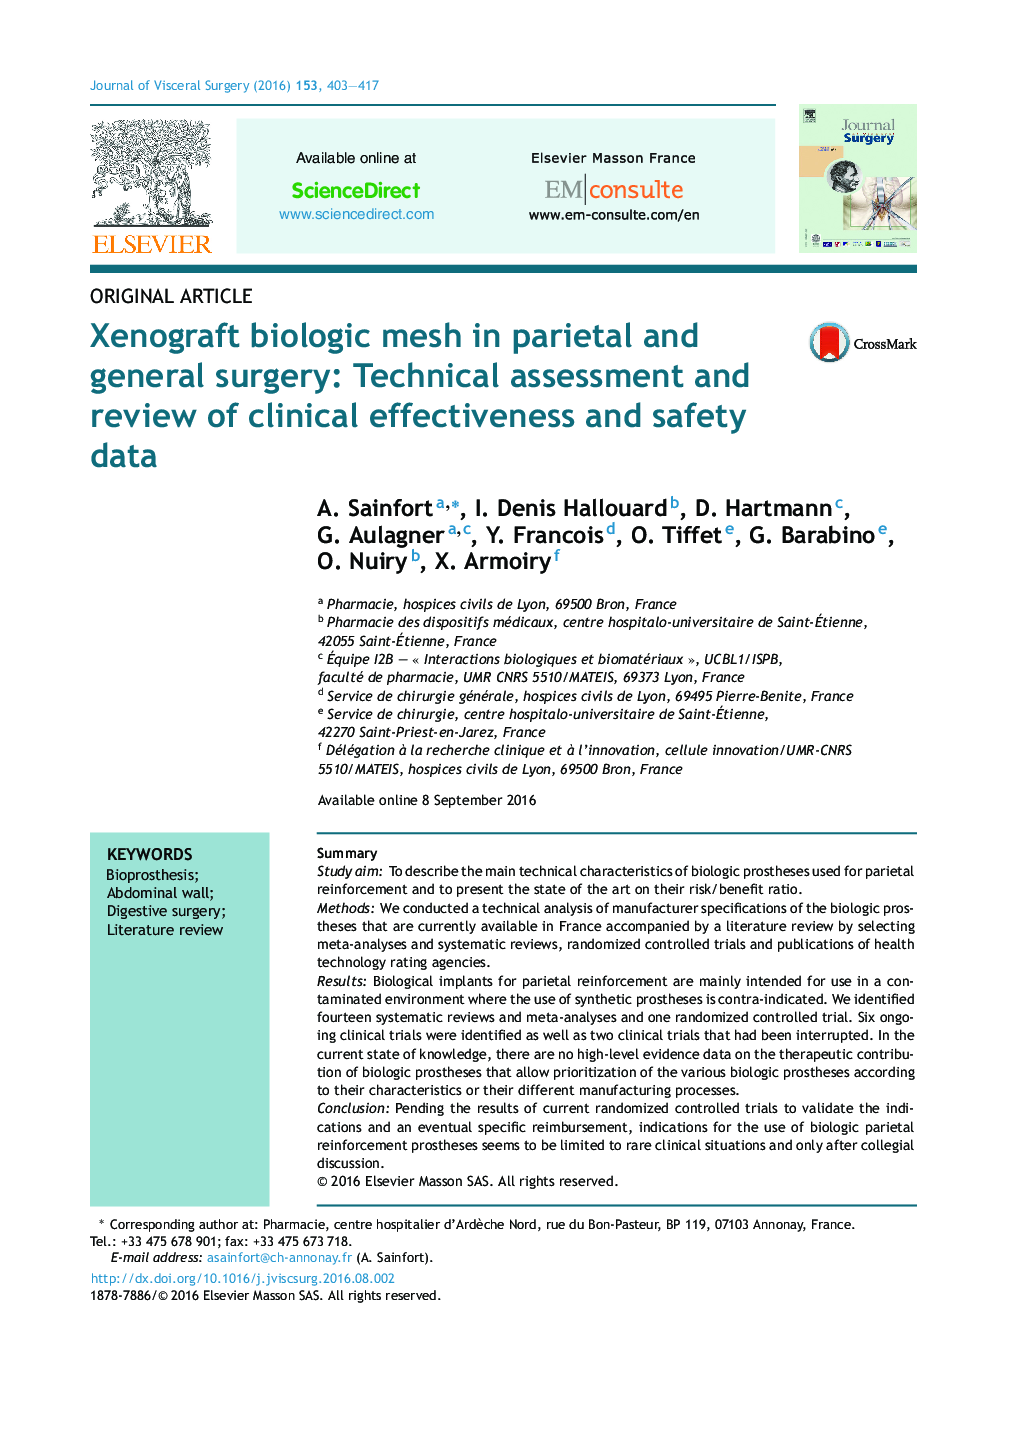 Xenograft biologic mesh in parietal and general surgery: Technical assessment and review of clinical effectiveness and safety data